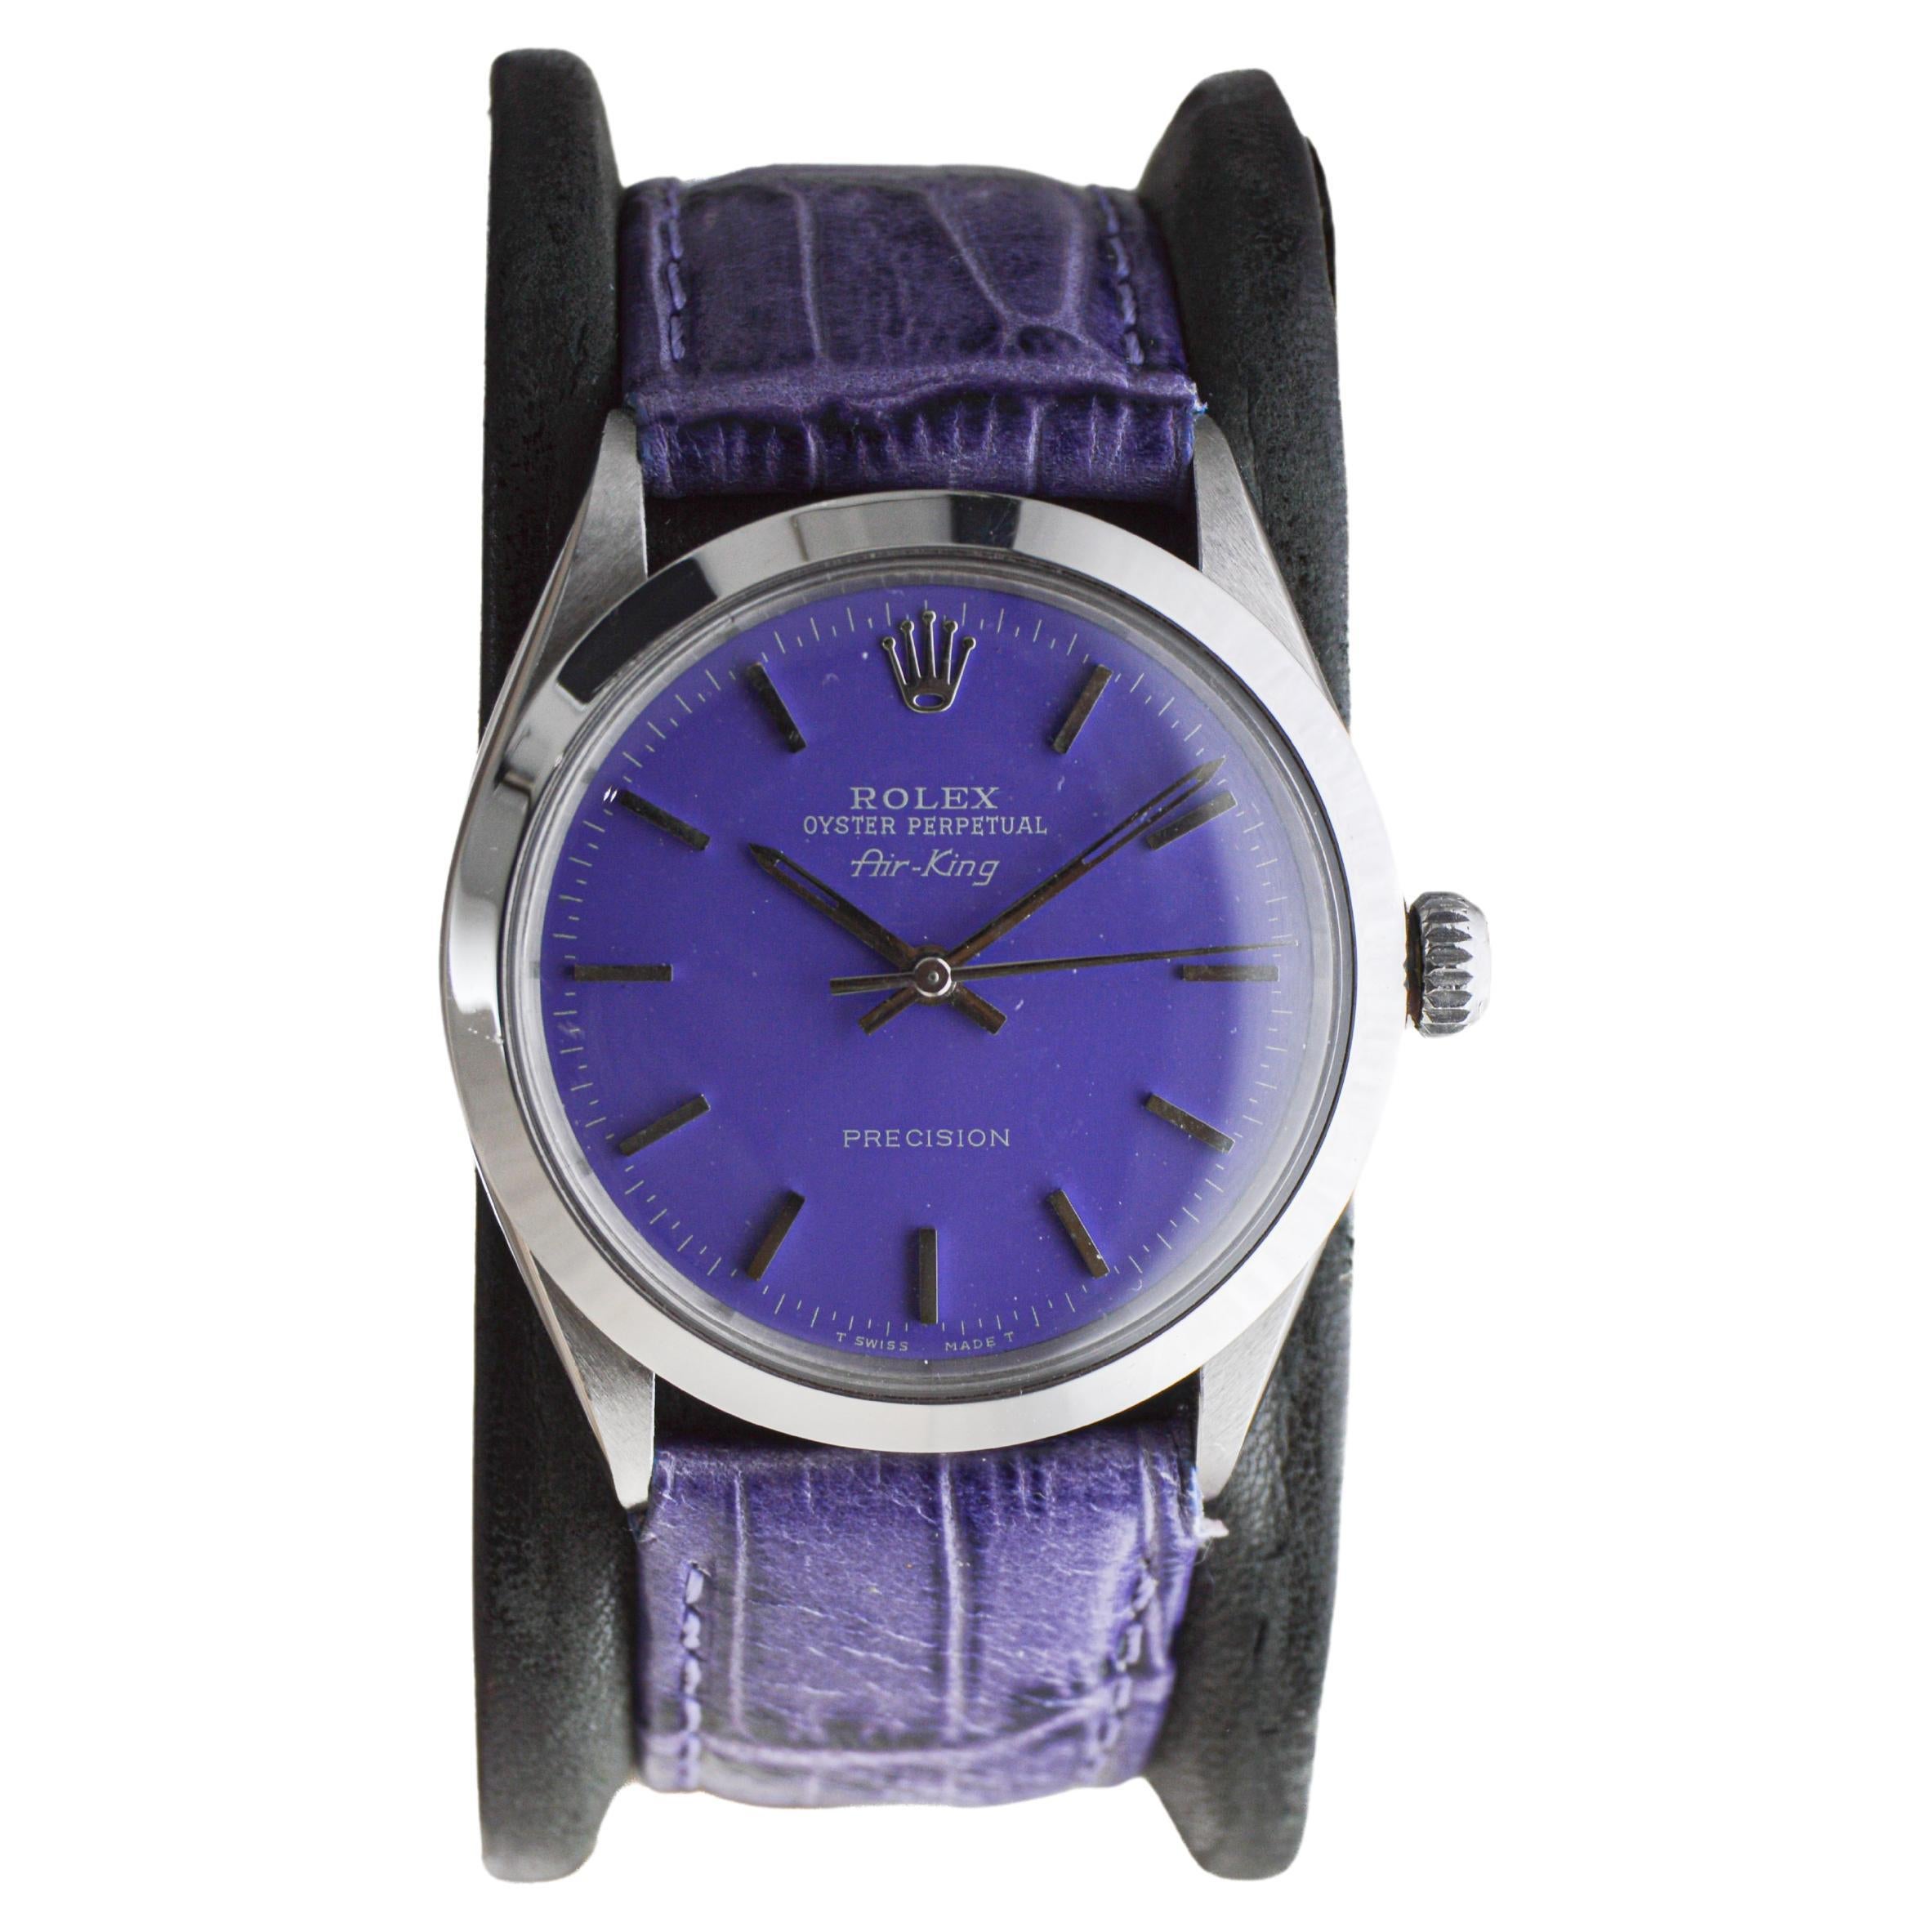 Rolex Stainless Steel Air King With Custom Purple Dial circa, 1960's